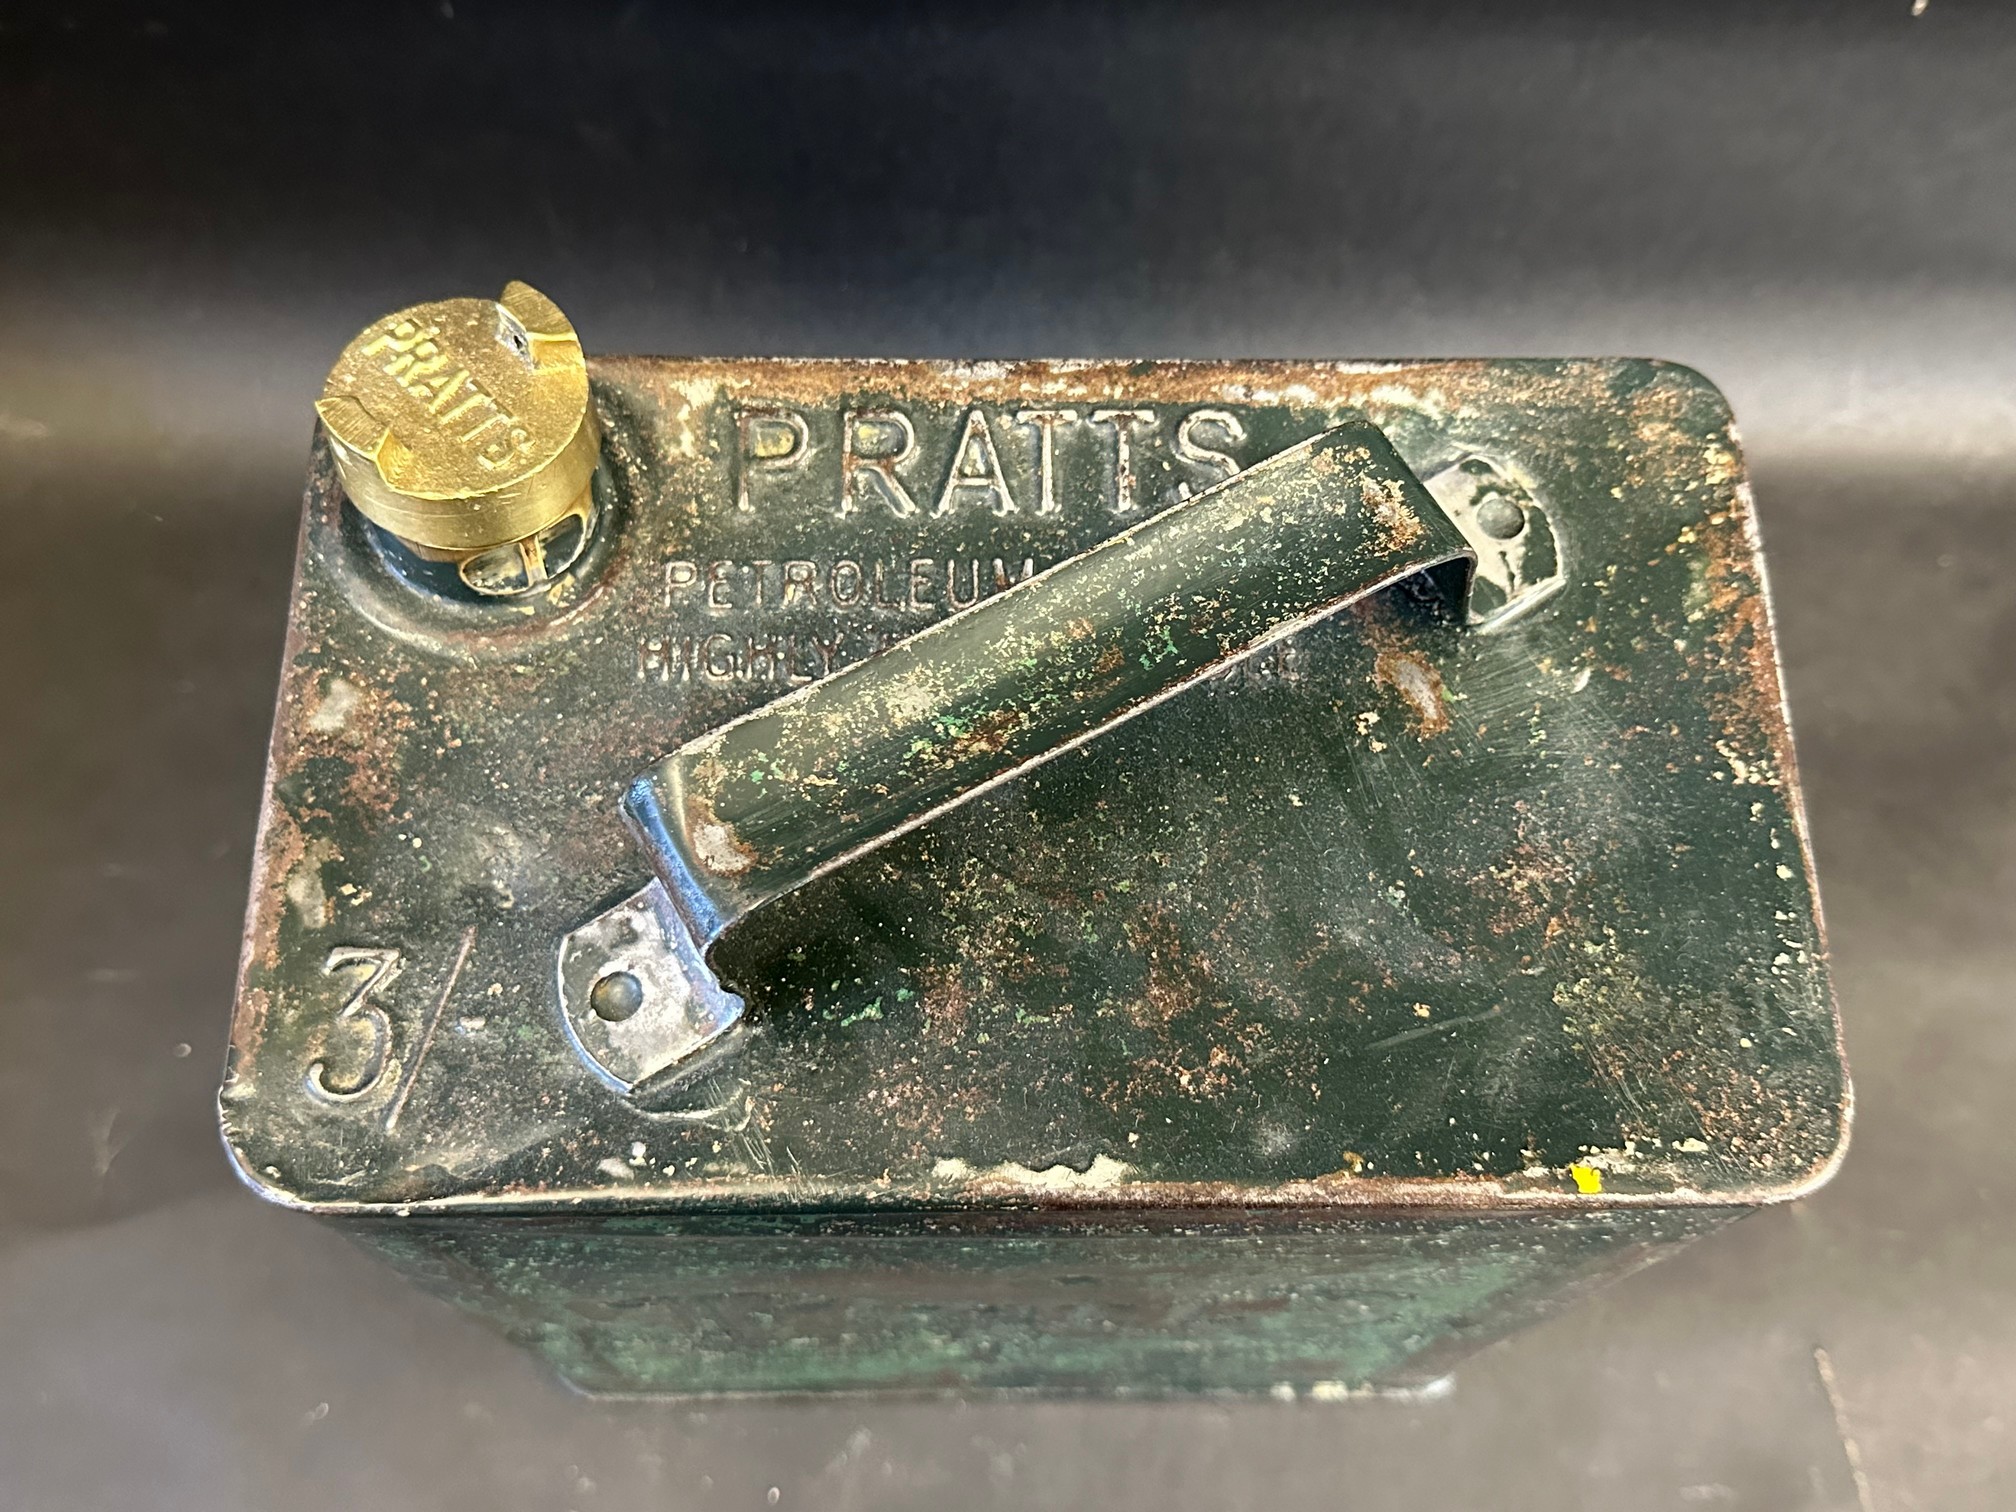 A Pratts two gallon petrol can by Valor, dated March 1931, brass Pratts cap. - Image 3 of 4